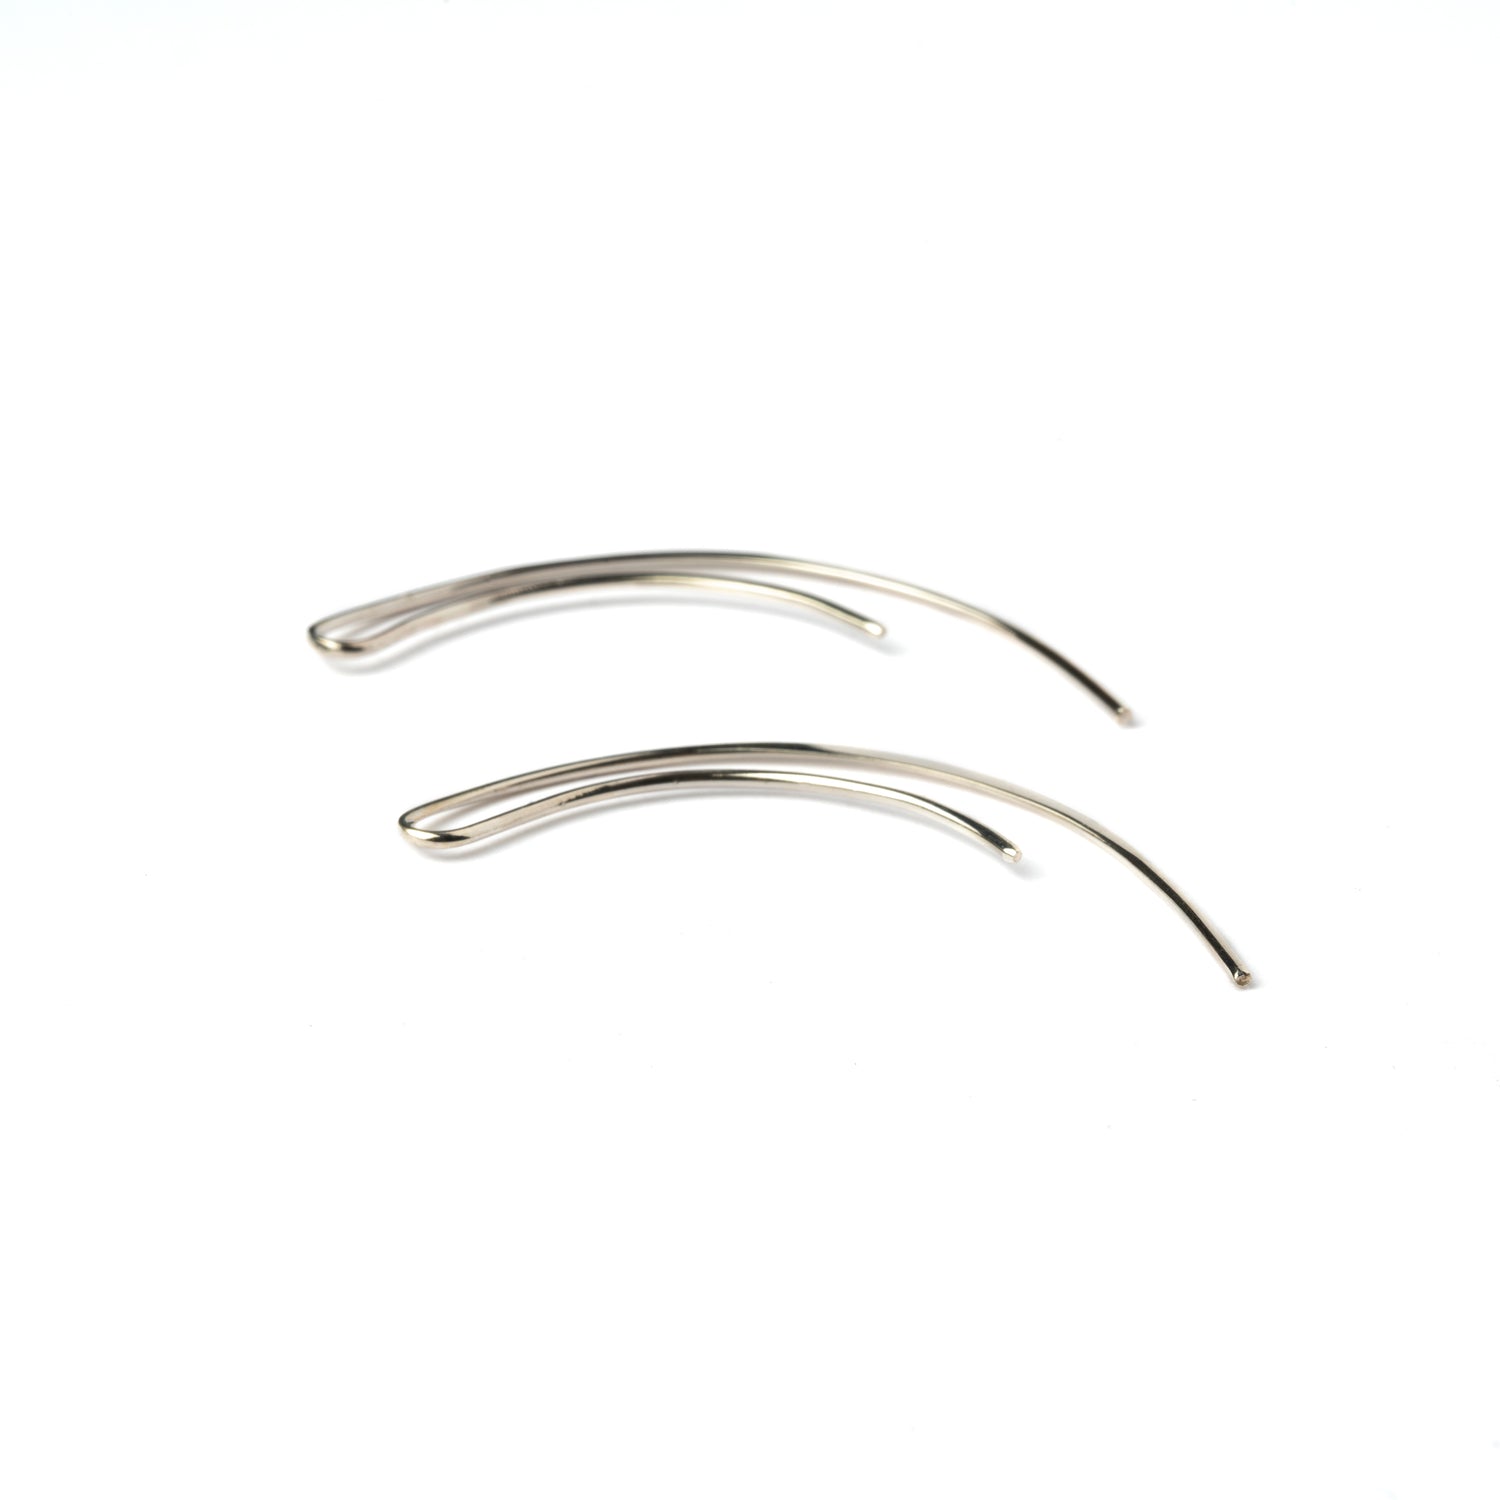 Silver Bent Wire Earrings right side view